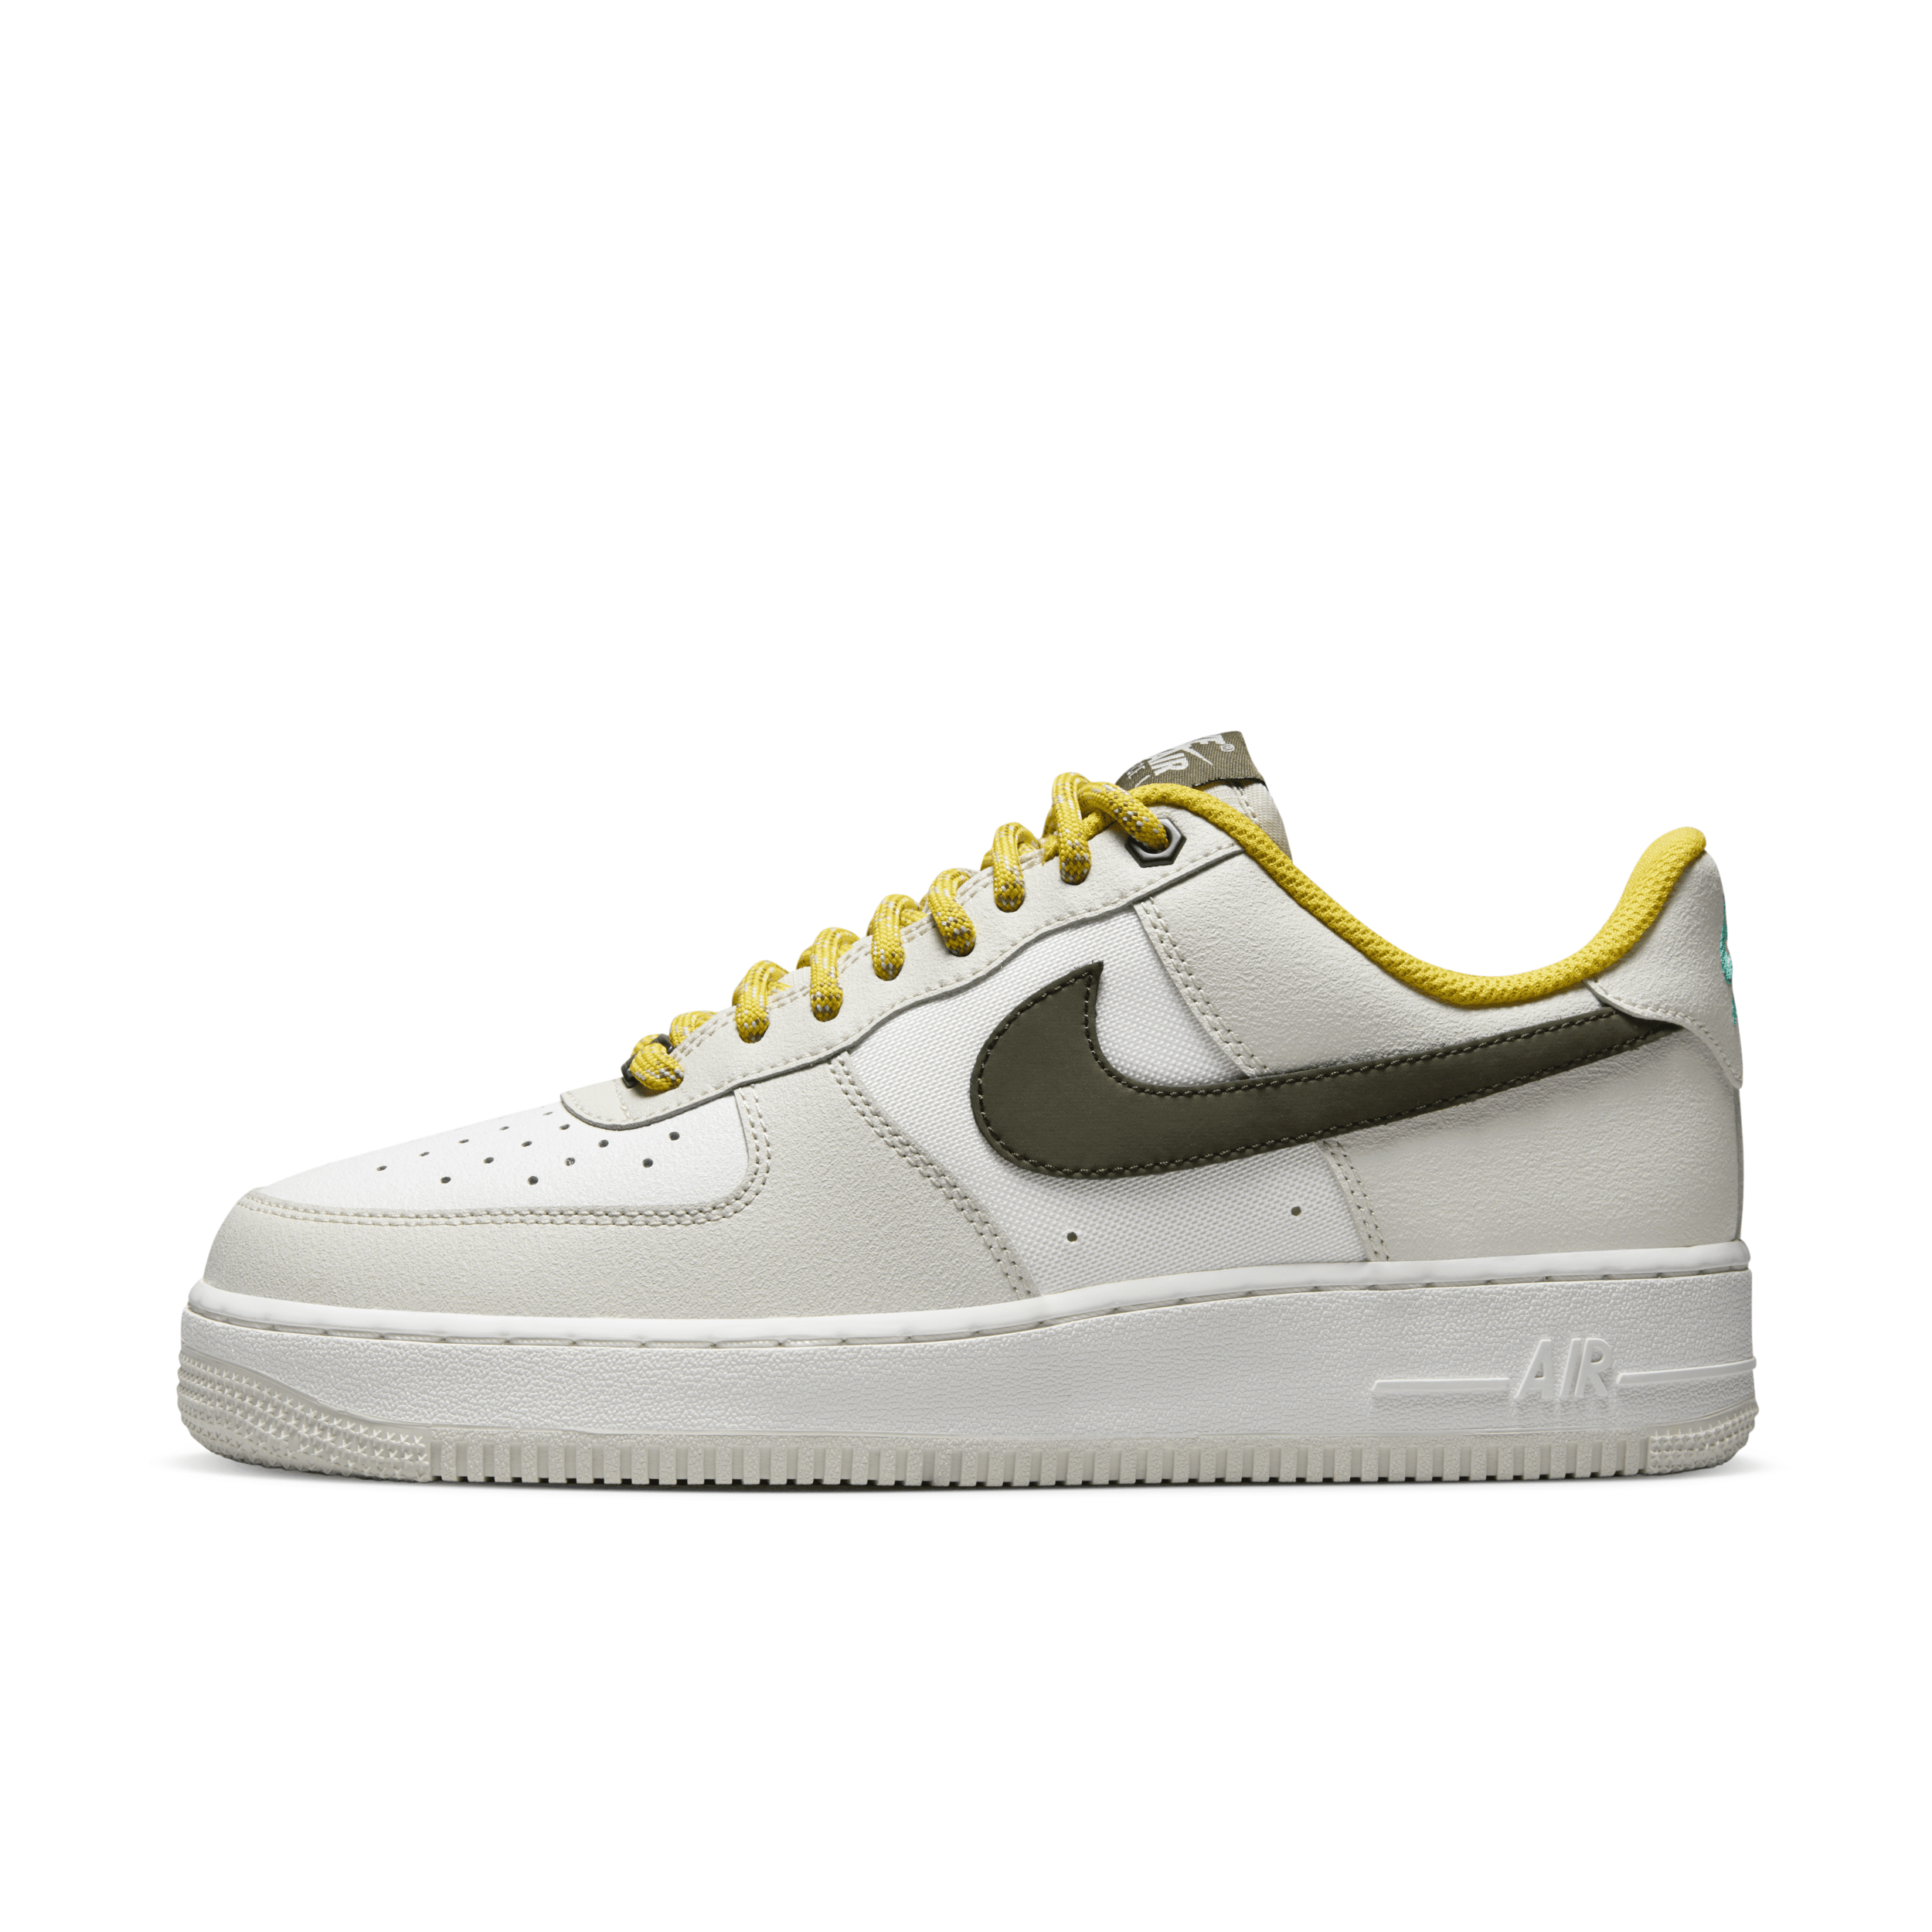 Nike Men's Air Force 1 '07 Premium Shoes in Grey, Size: 8 | FV3628-031